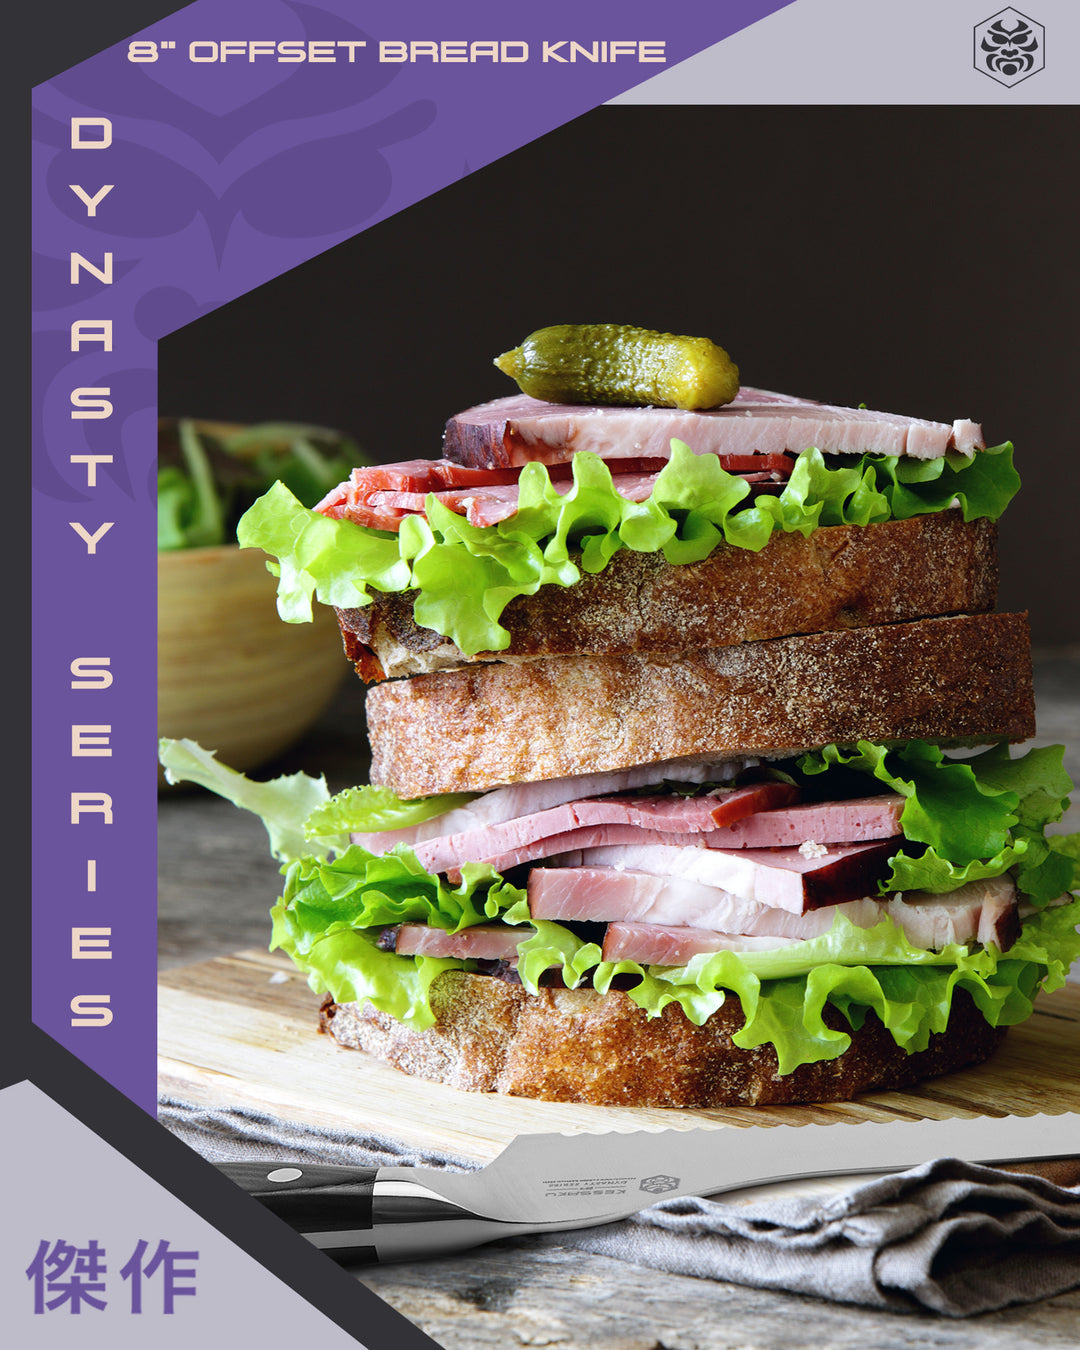 A towering sandwich with thick cuts of ham, and leafy greens prepared with the Dynasty Offset Deli Knife